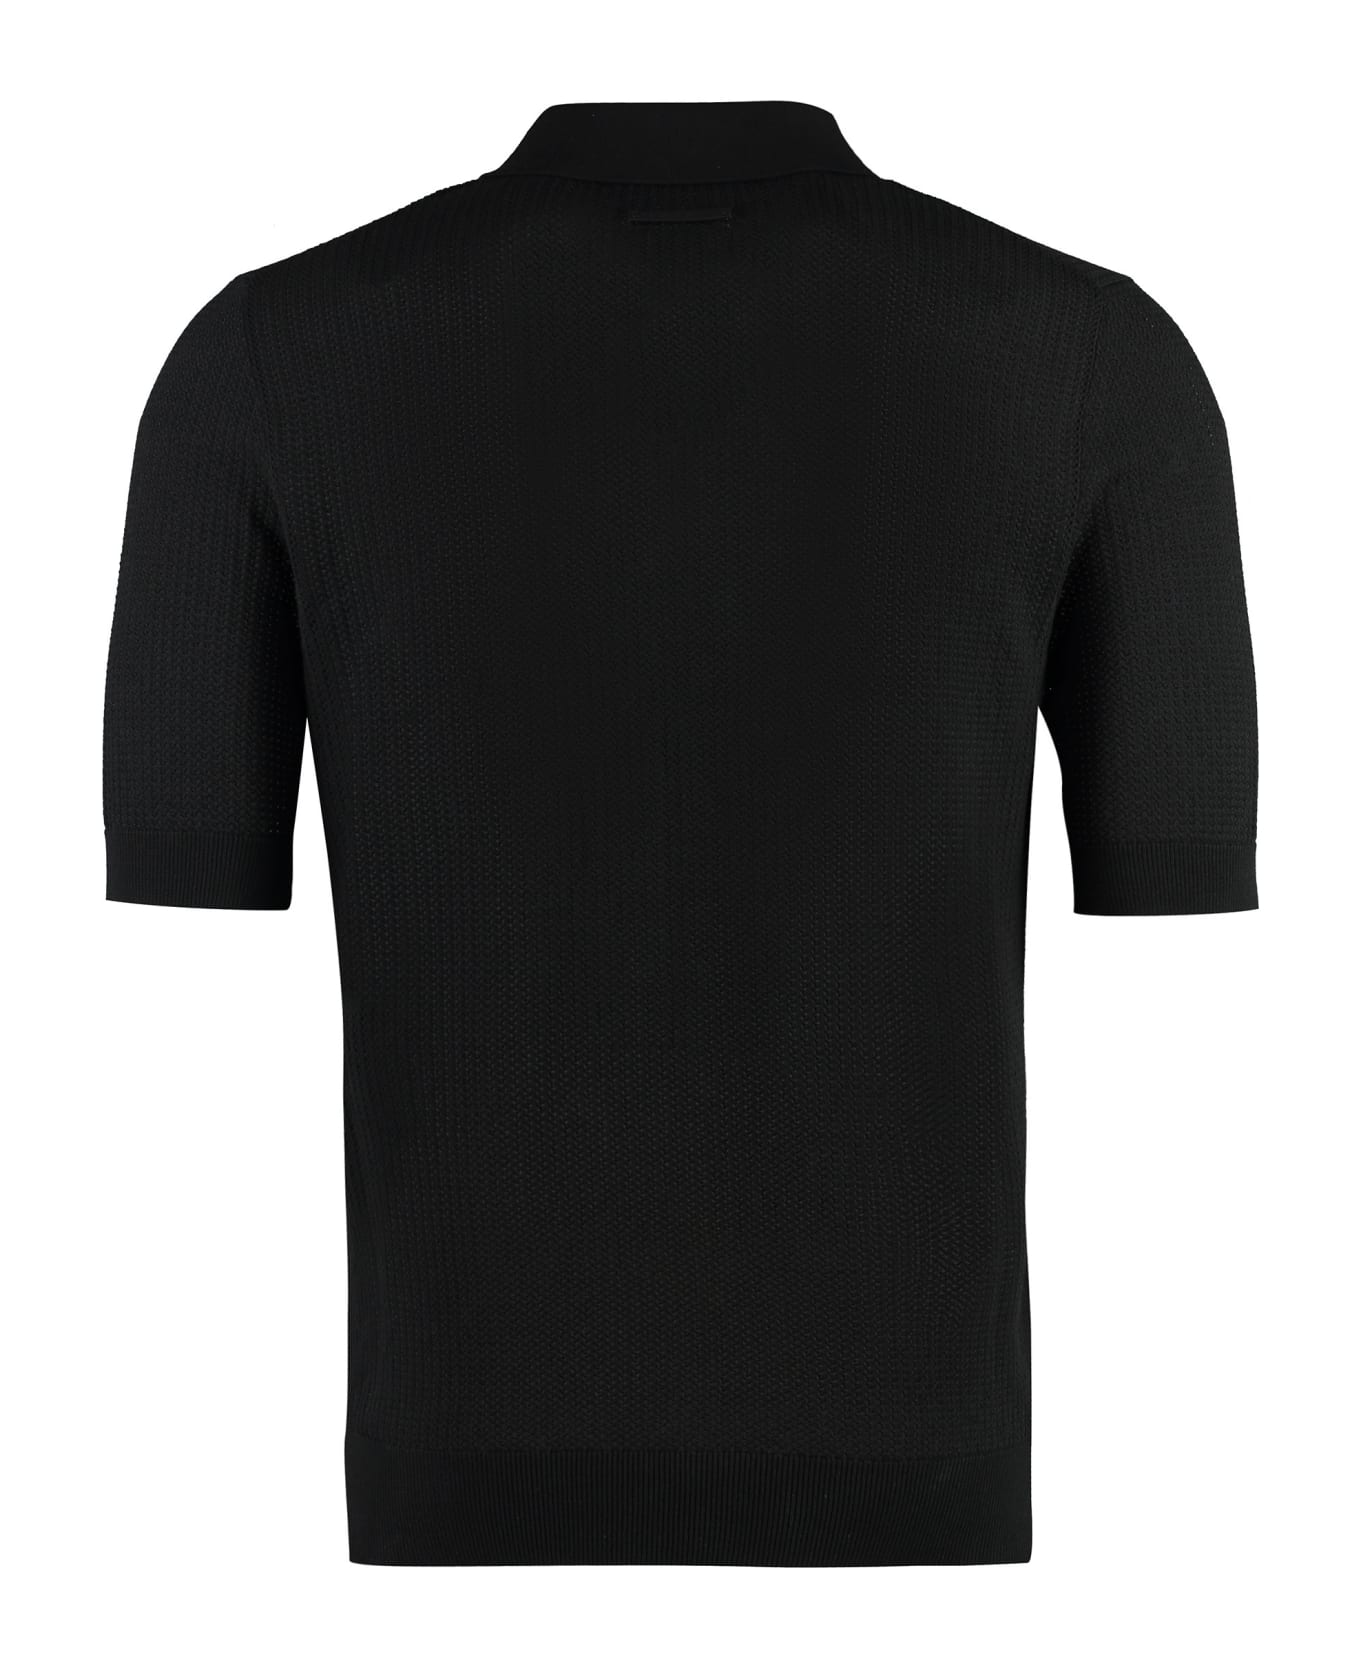 Dolce & Gabbana Knitted Cotton Polo Shirt - black ポロシャツ